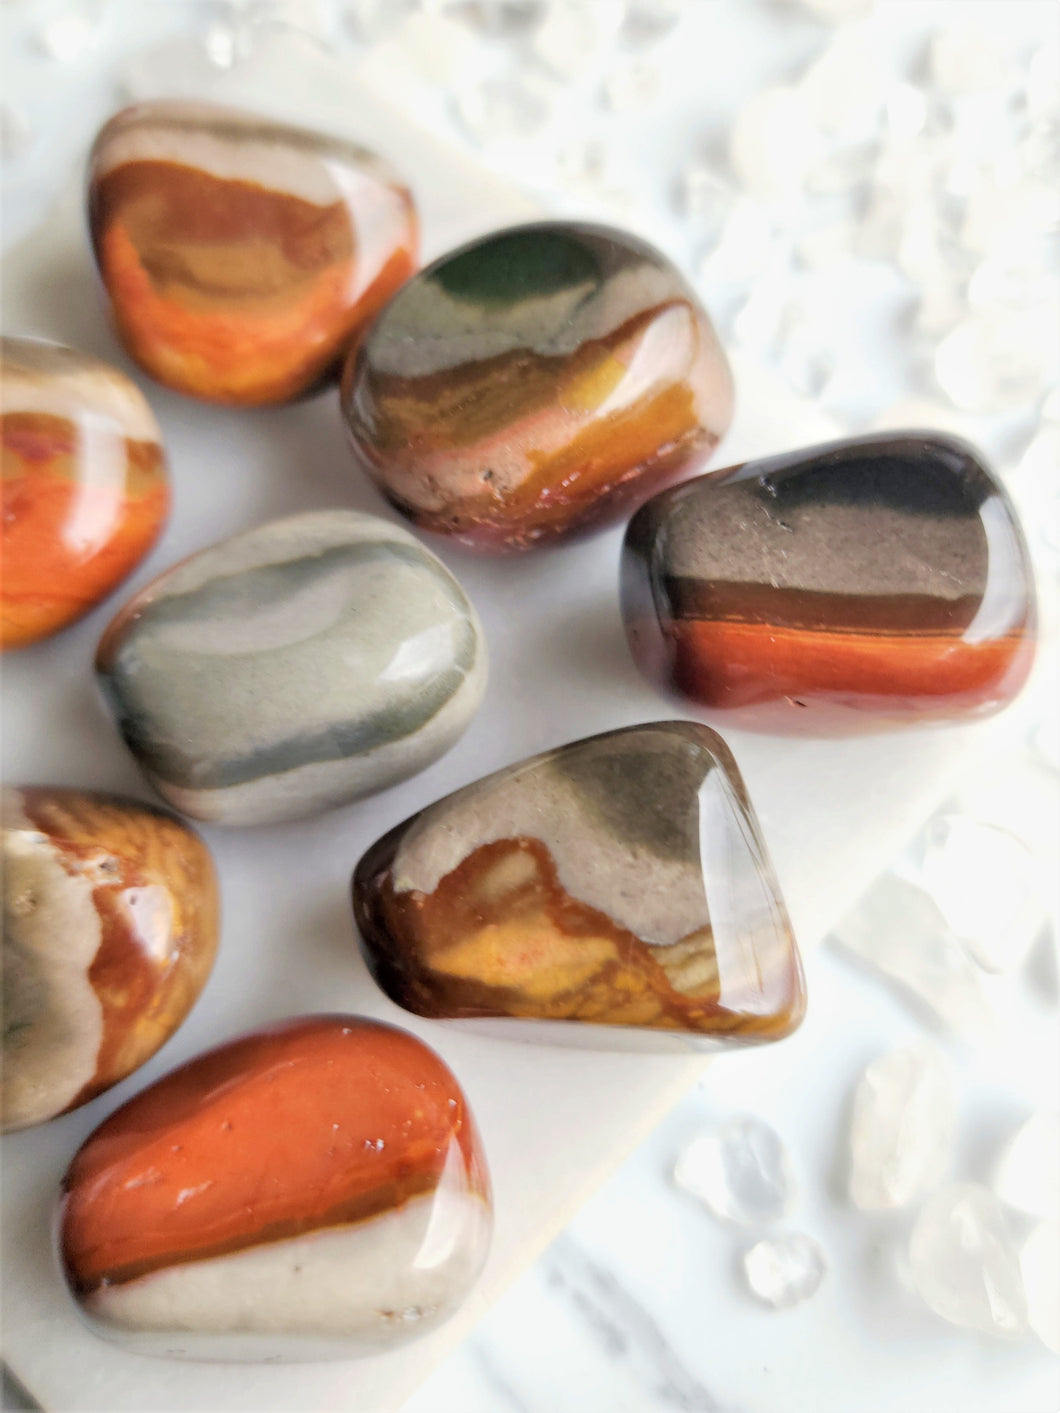 Polychrome Jasper is believed to possess grounding and nurturing qualities, promoting a sense of stability and balance